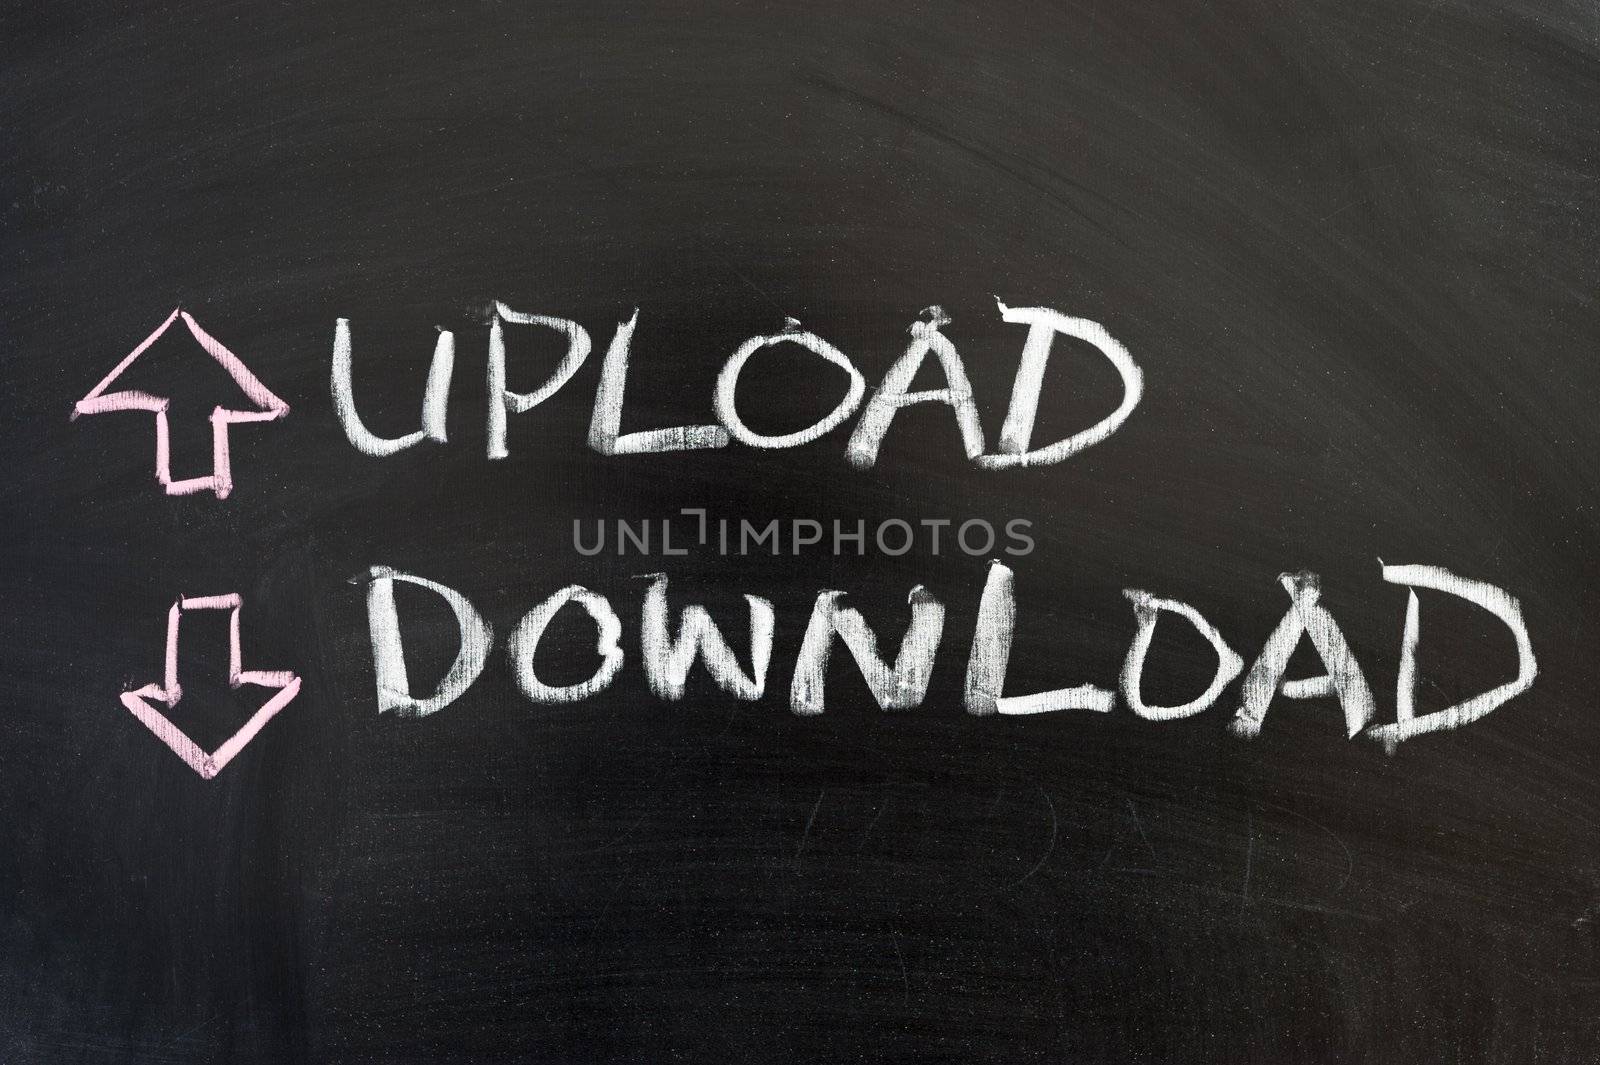 Upload and download by raywoo